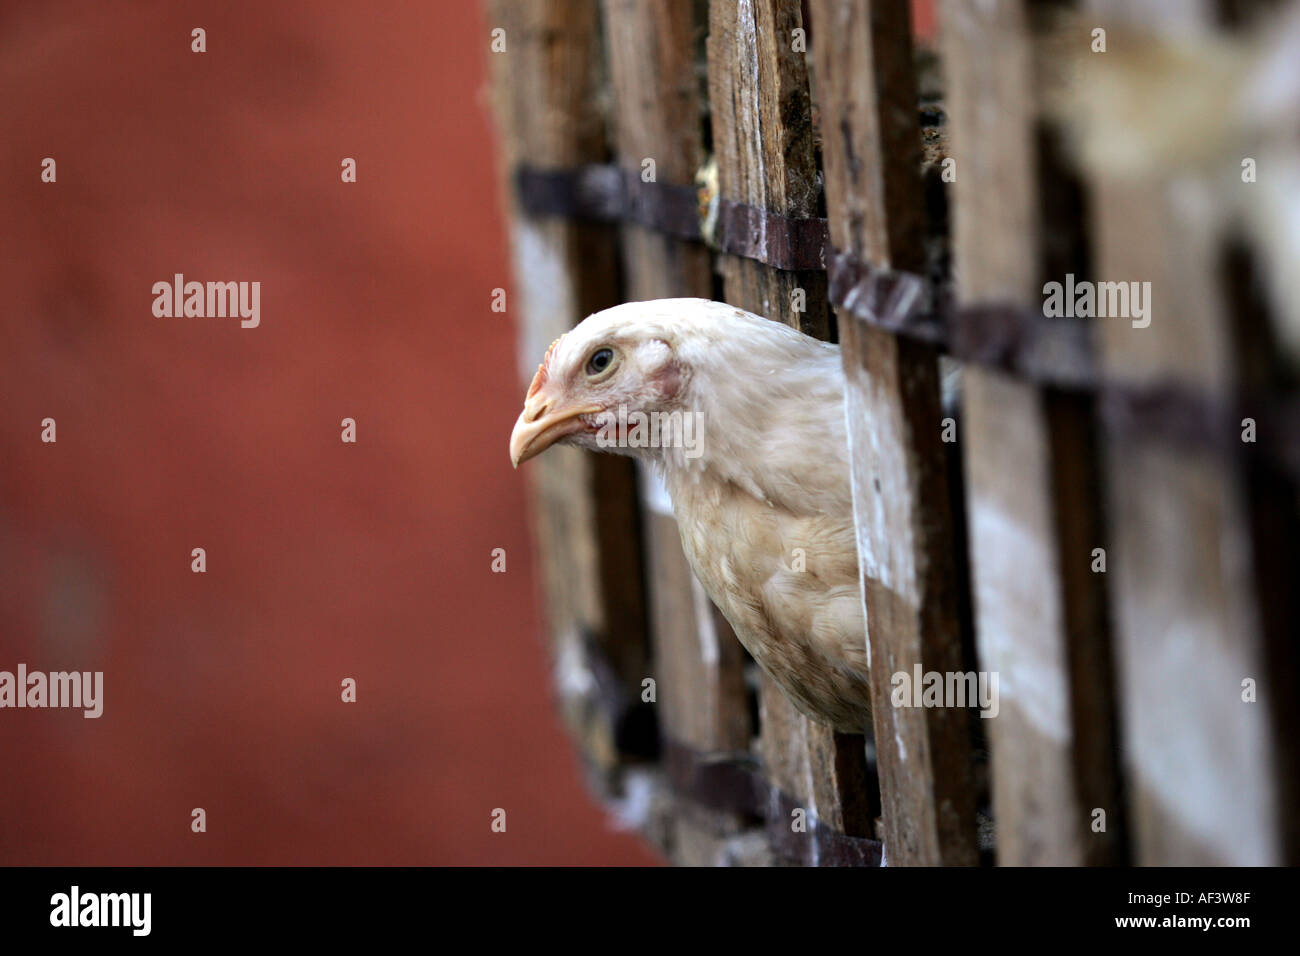 chickens for sale in a moroccan market in marrakech Stock Photo